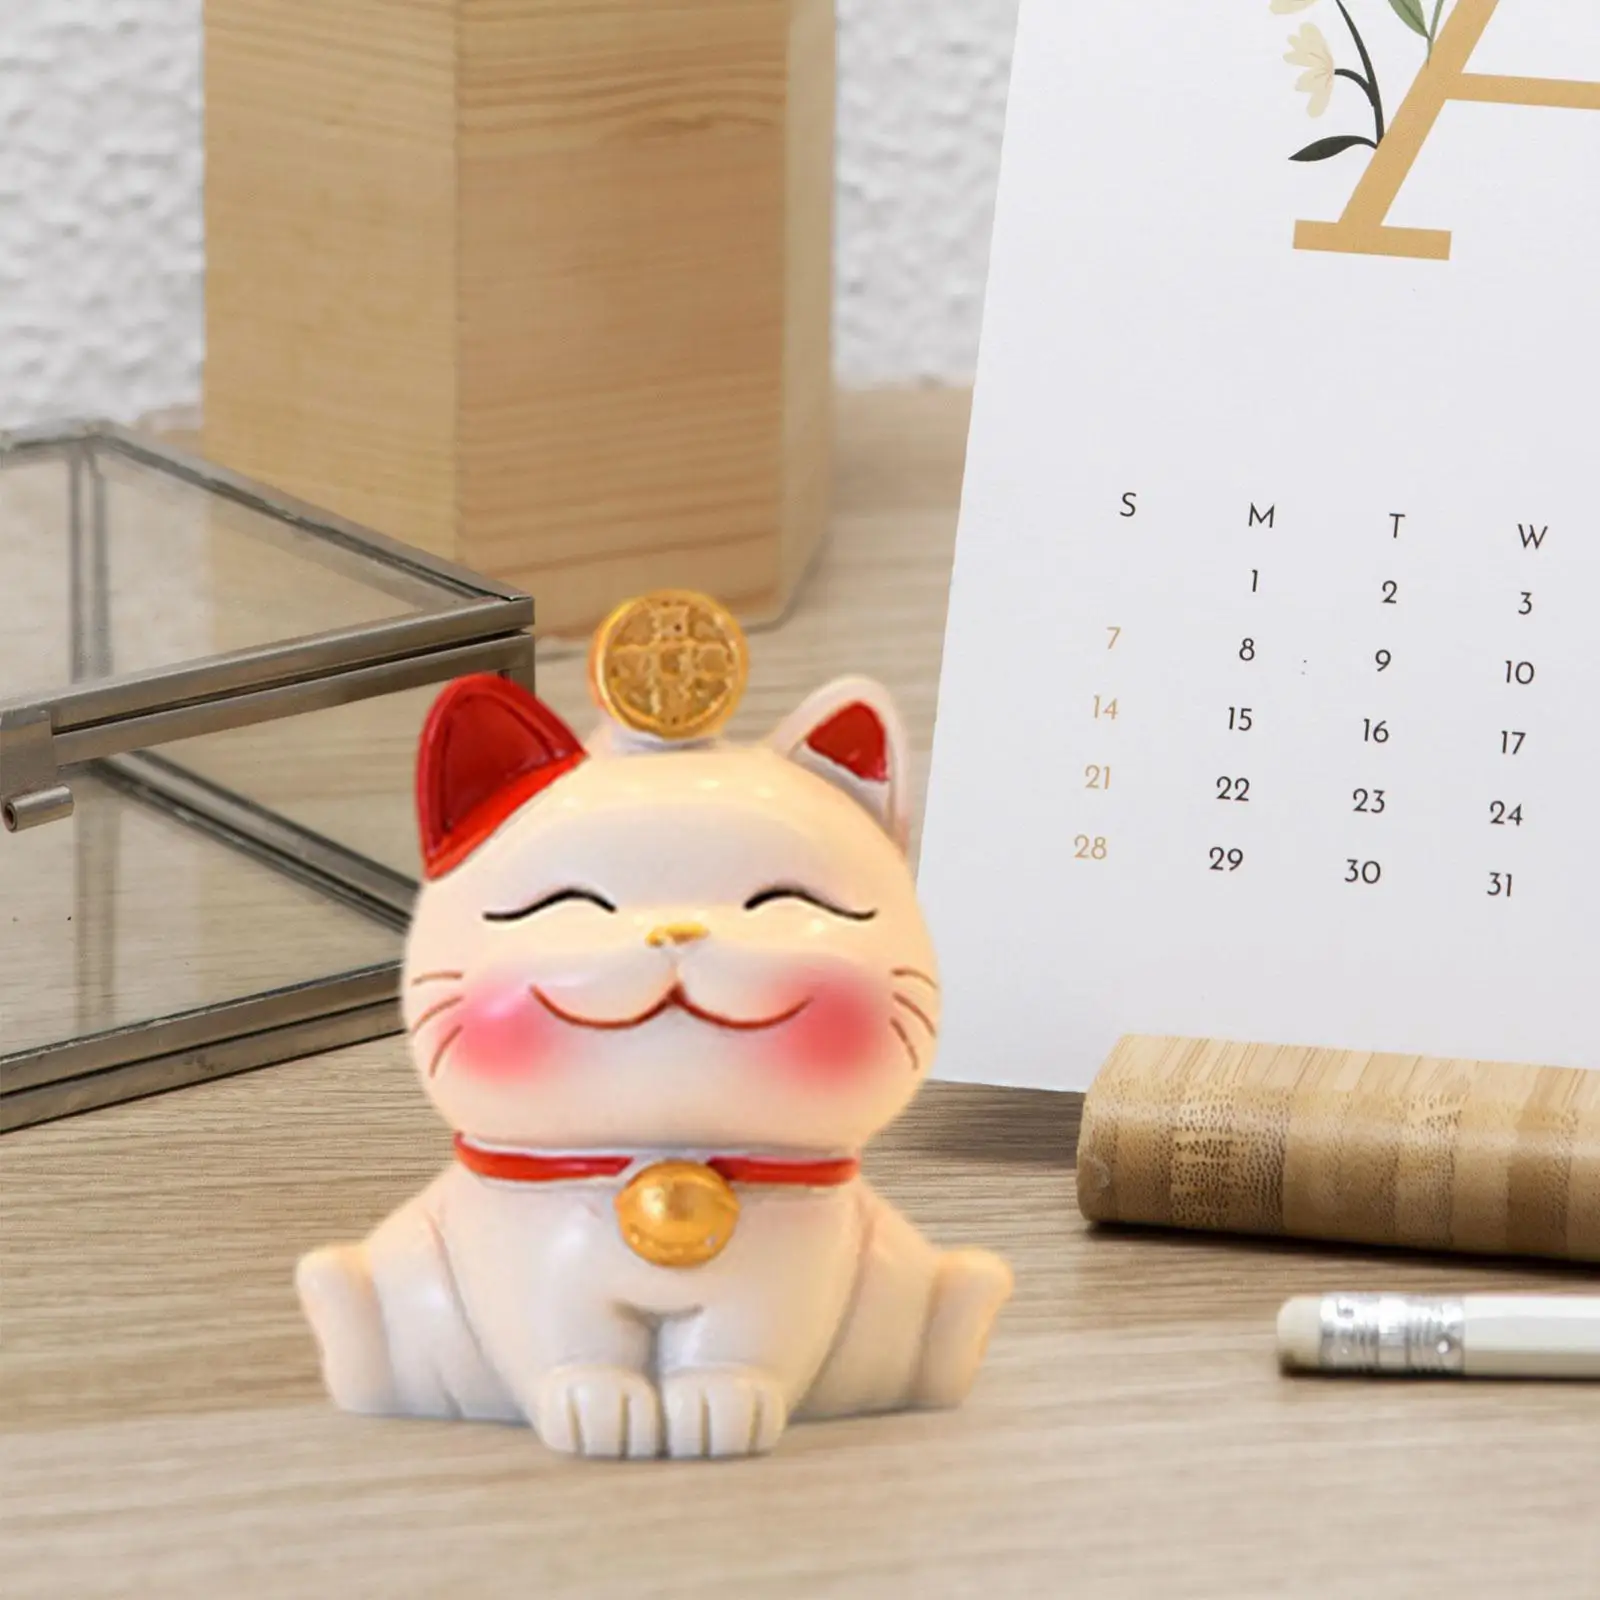 Chinese Cat Statue Mini Lucky Cat Figurine Desk Decorations Birthday Gift Welcoming Cat for Shelf Entrance Front Desk Decoration